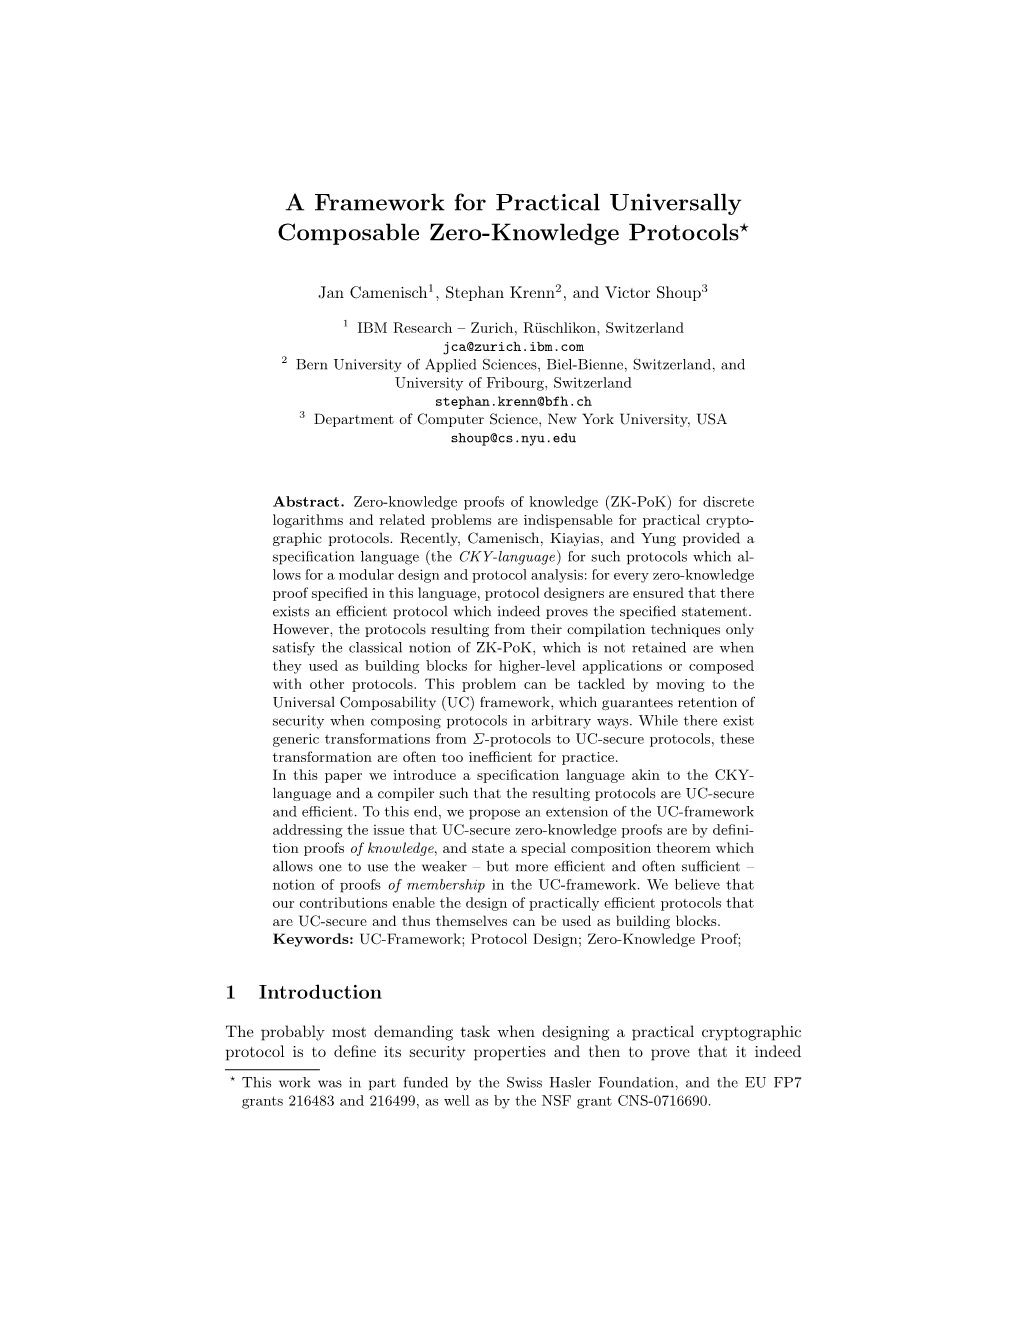 A Framework for Practical Universally Composable Zero-Knowledge Protocols?